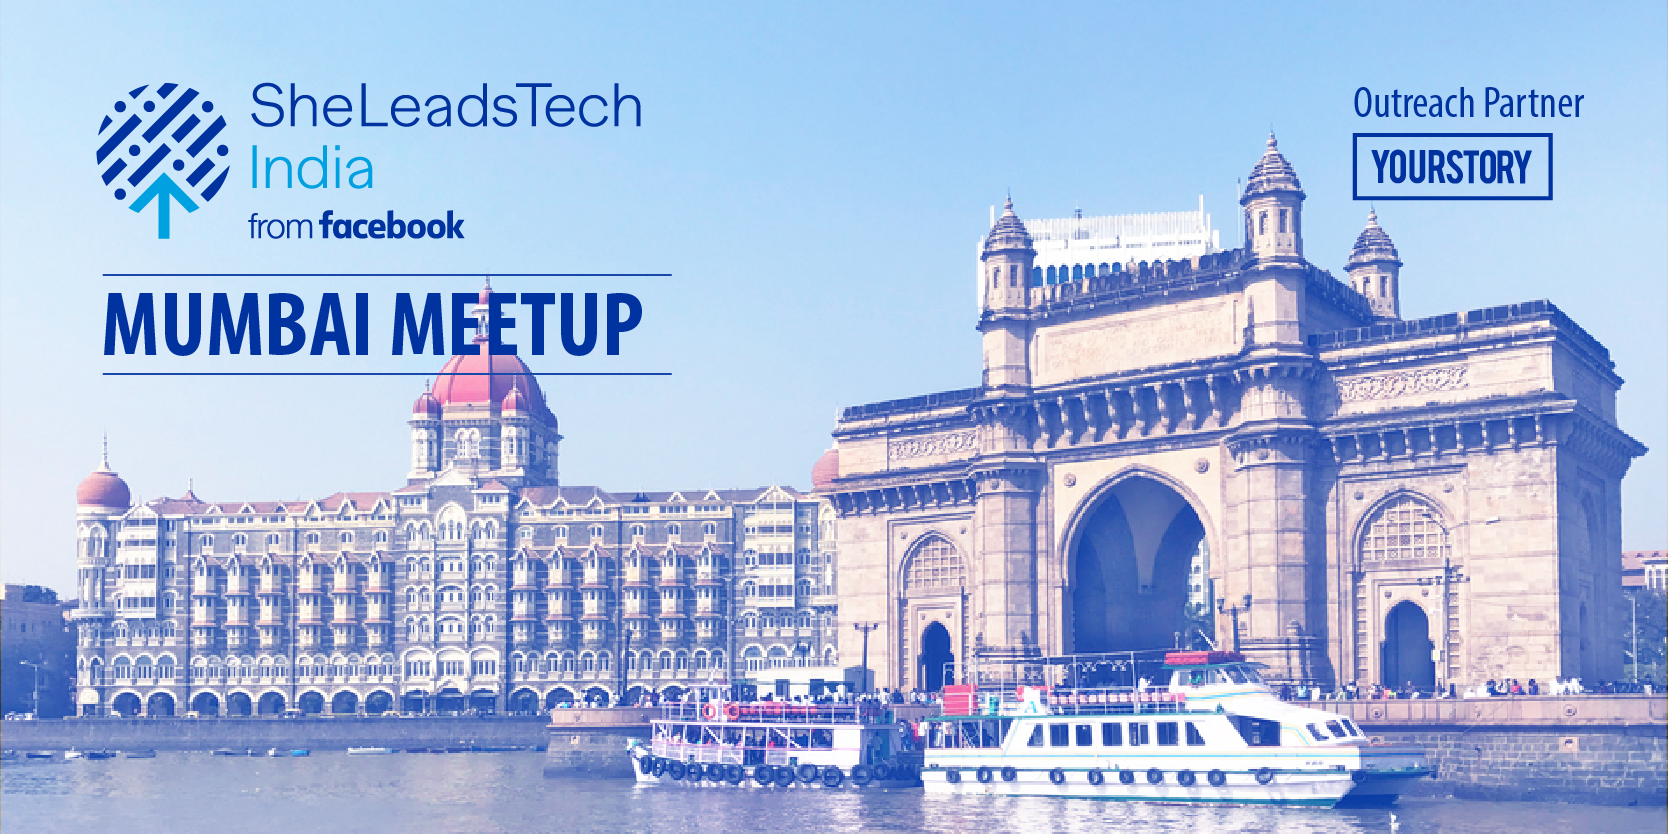 4 reasons why you should attend Facebook’s SheLeadsTech Mumbai event